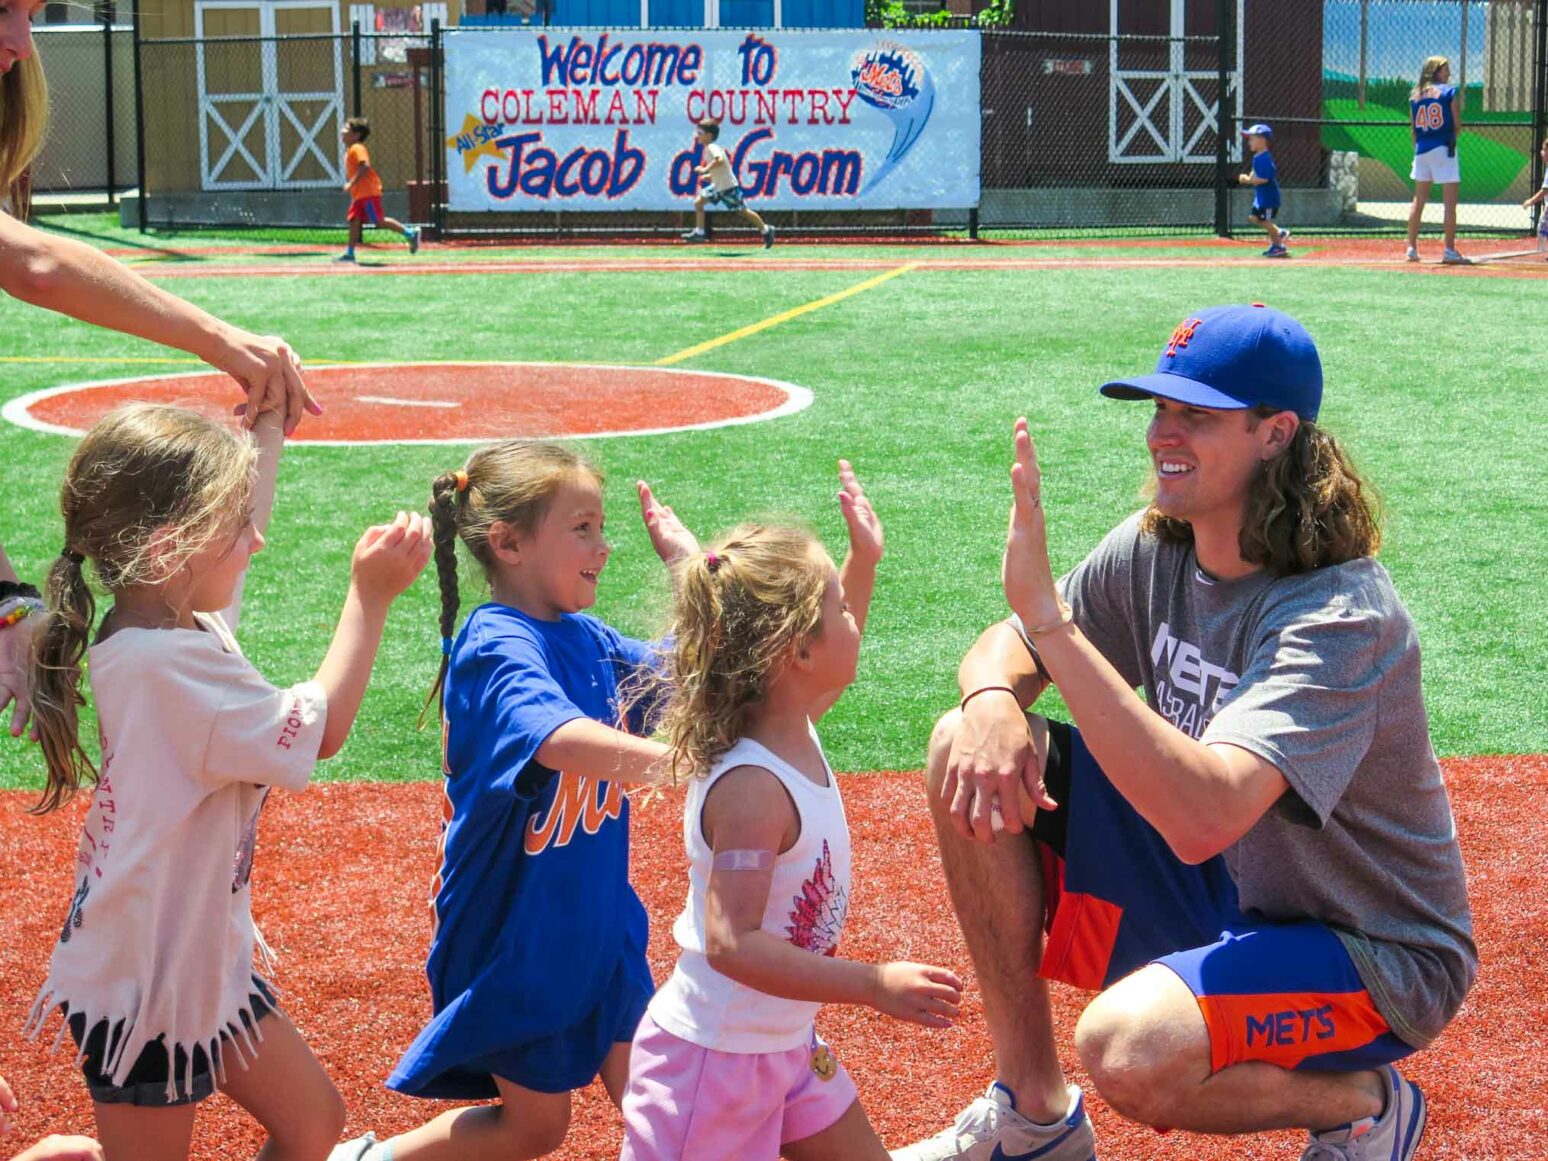 Jacob deGrom high fives a row of campers